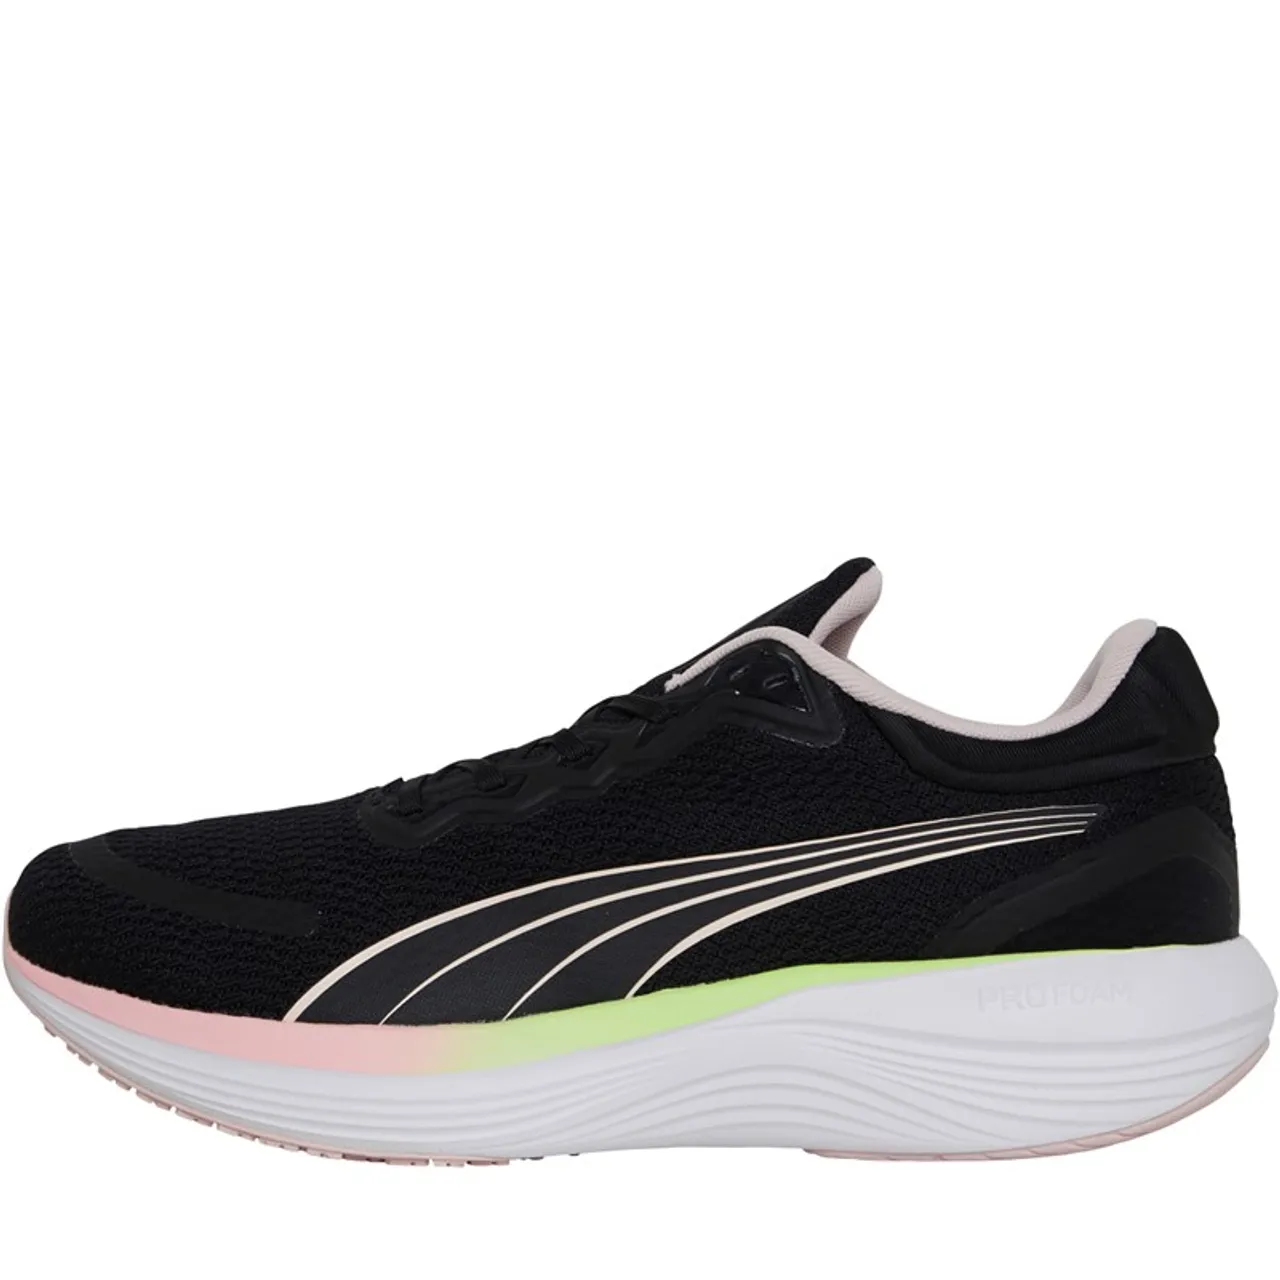 Puma Scend Pro Neutral Running Shoes Black/Pink/Green/White